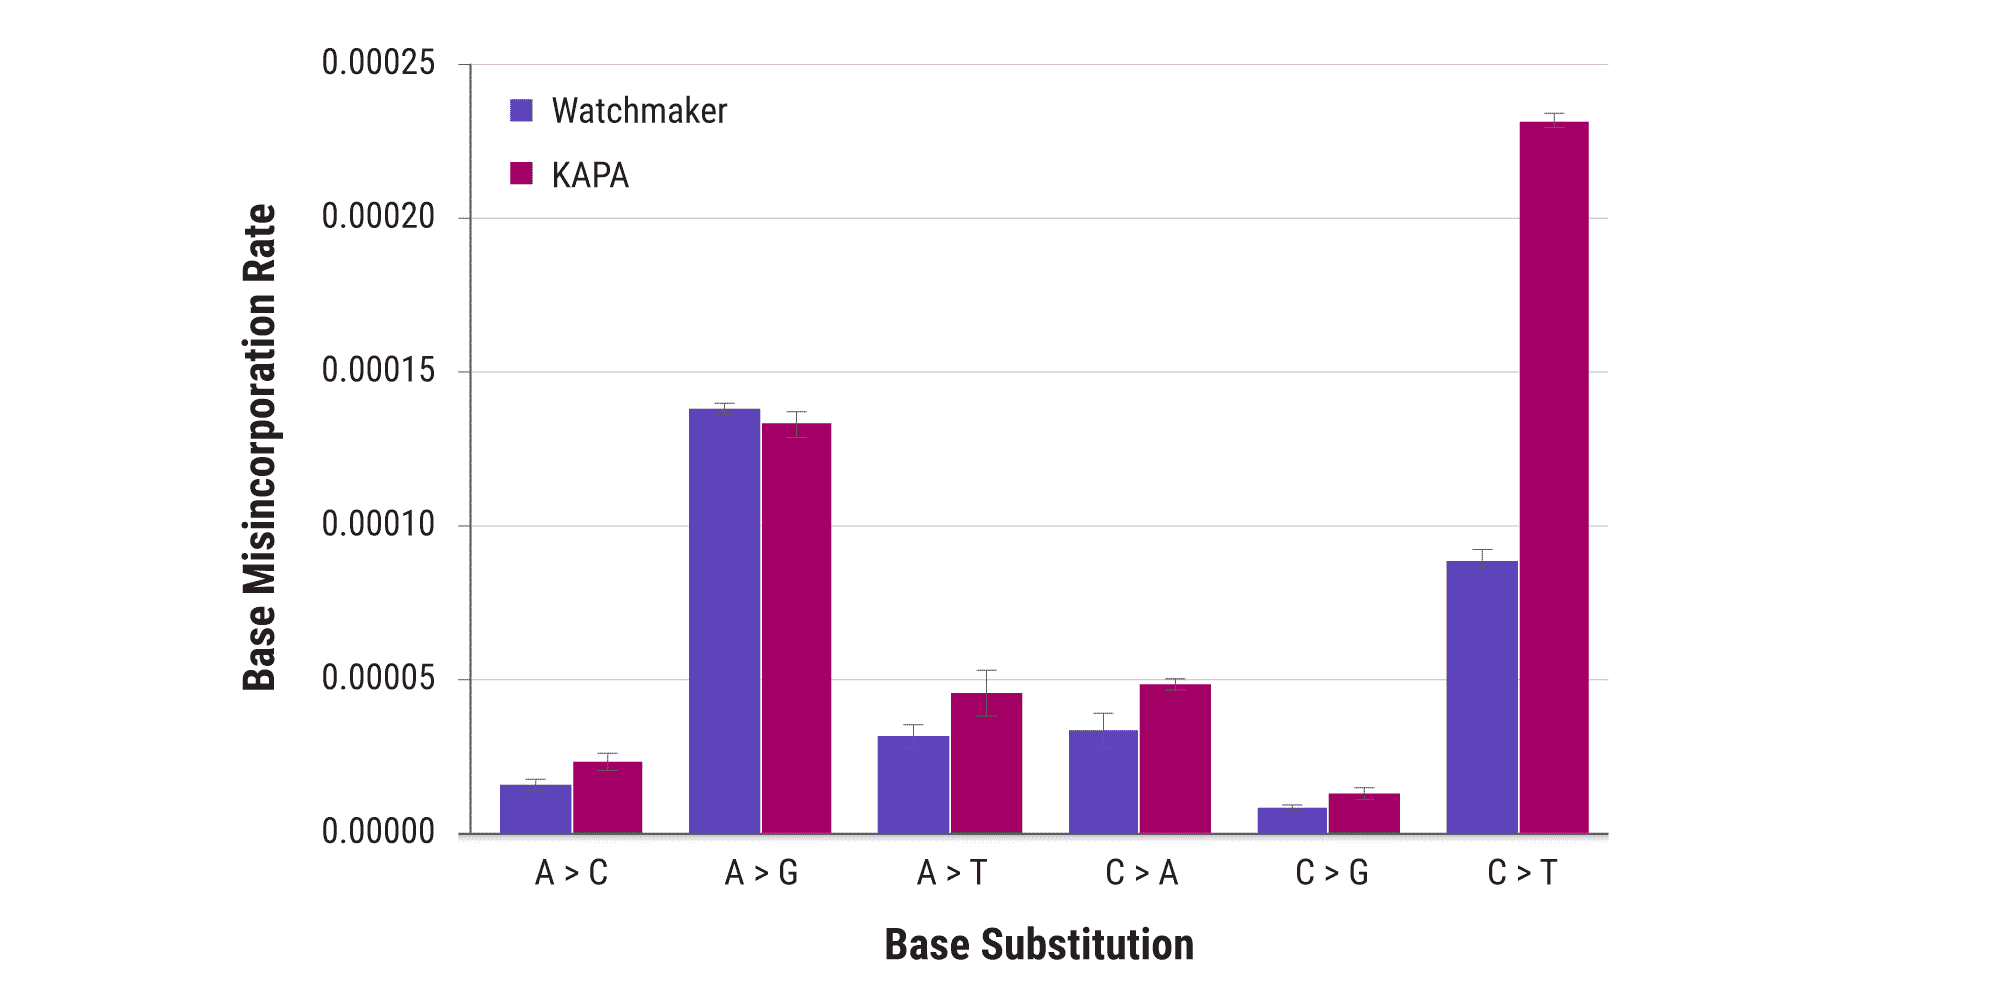 Figure 1. Up to 40% reduction in overall polymerase error rate. Error rates of the Equinox Amplification Master Mix and KAPA HiFi HotStart ReadyMix were measured after >9 million base incorporation events in three separate reactions, using a proprietary NGS-based assay. Base substitution profiles were examined in triplicate over 5.4 million G/C incorporation events and 4.0 million A/T incorporation events. Equinox displayed an overall polymerase error rate 40% lower than that of KAPA HiFi HotStart ReadyMix™.